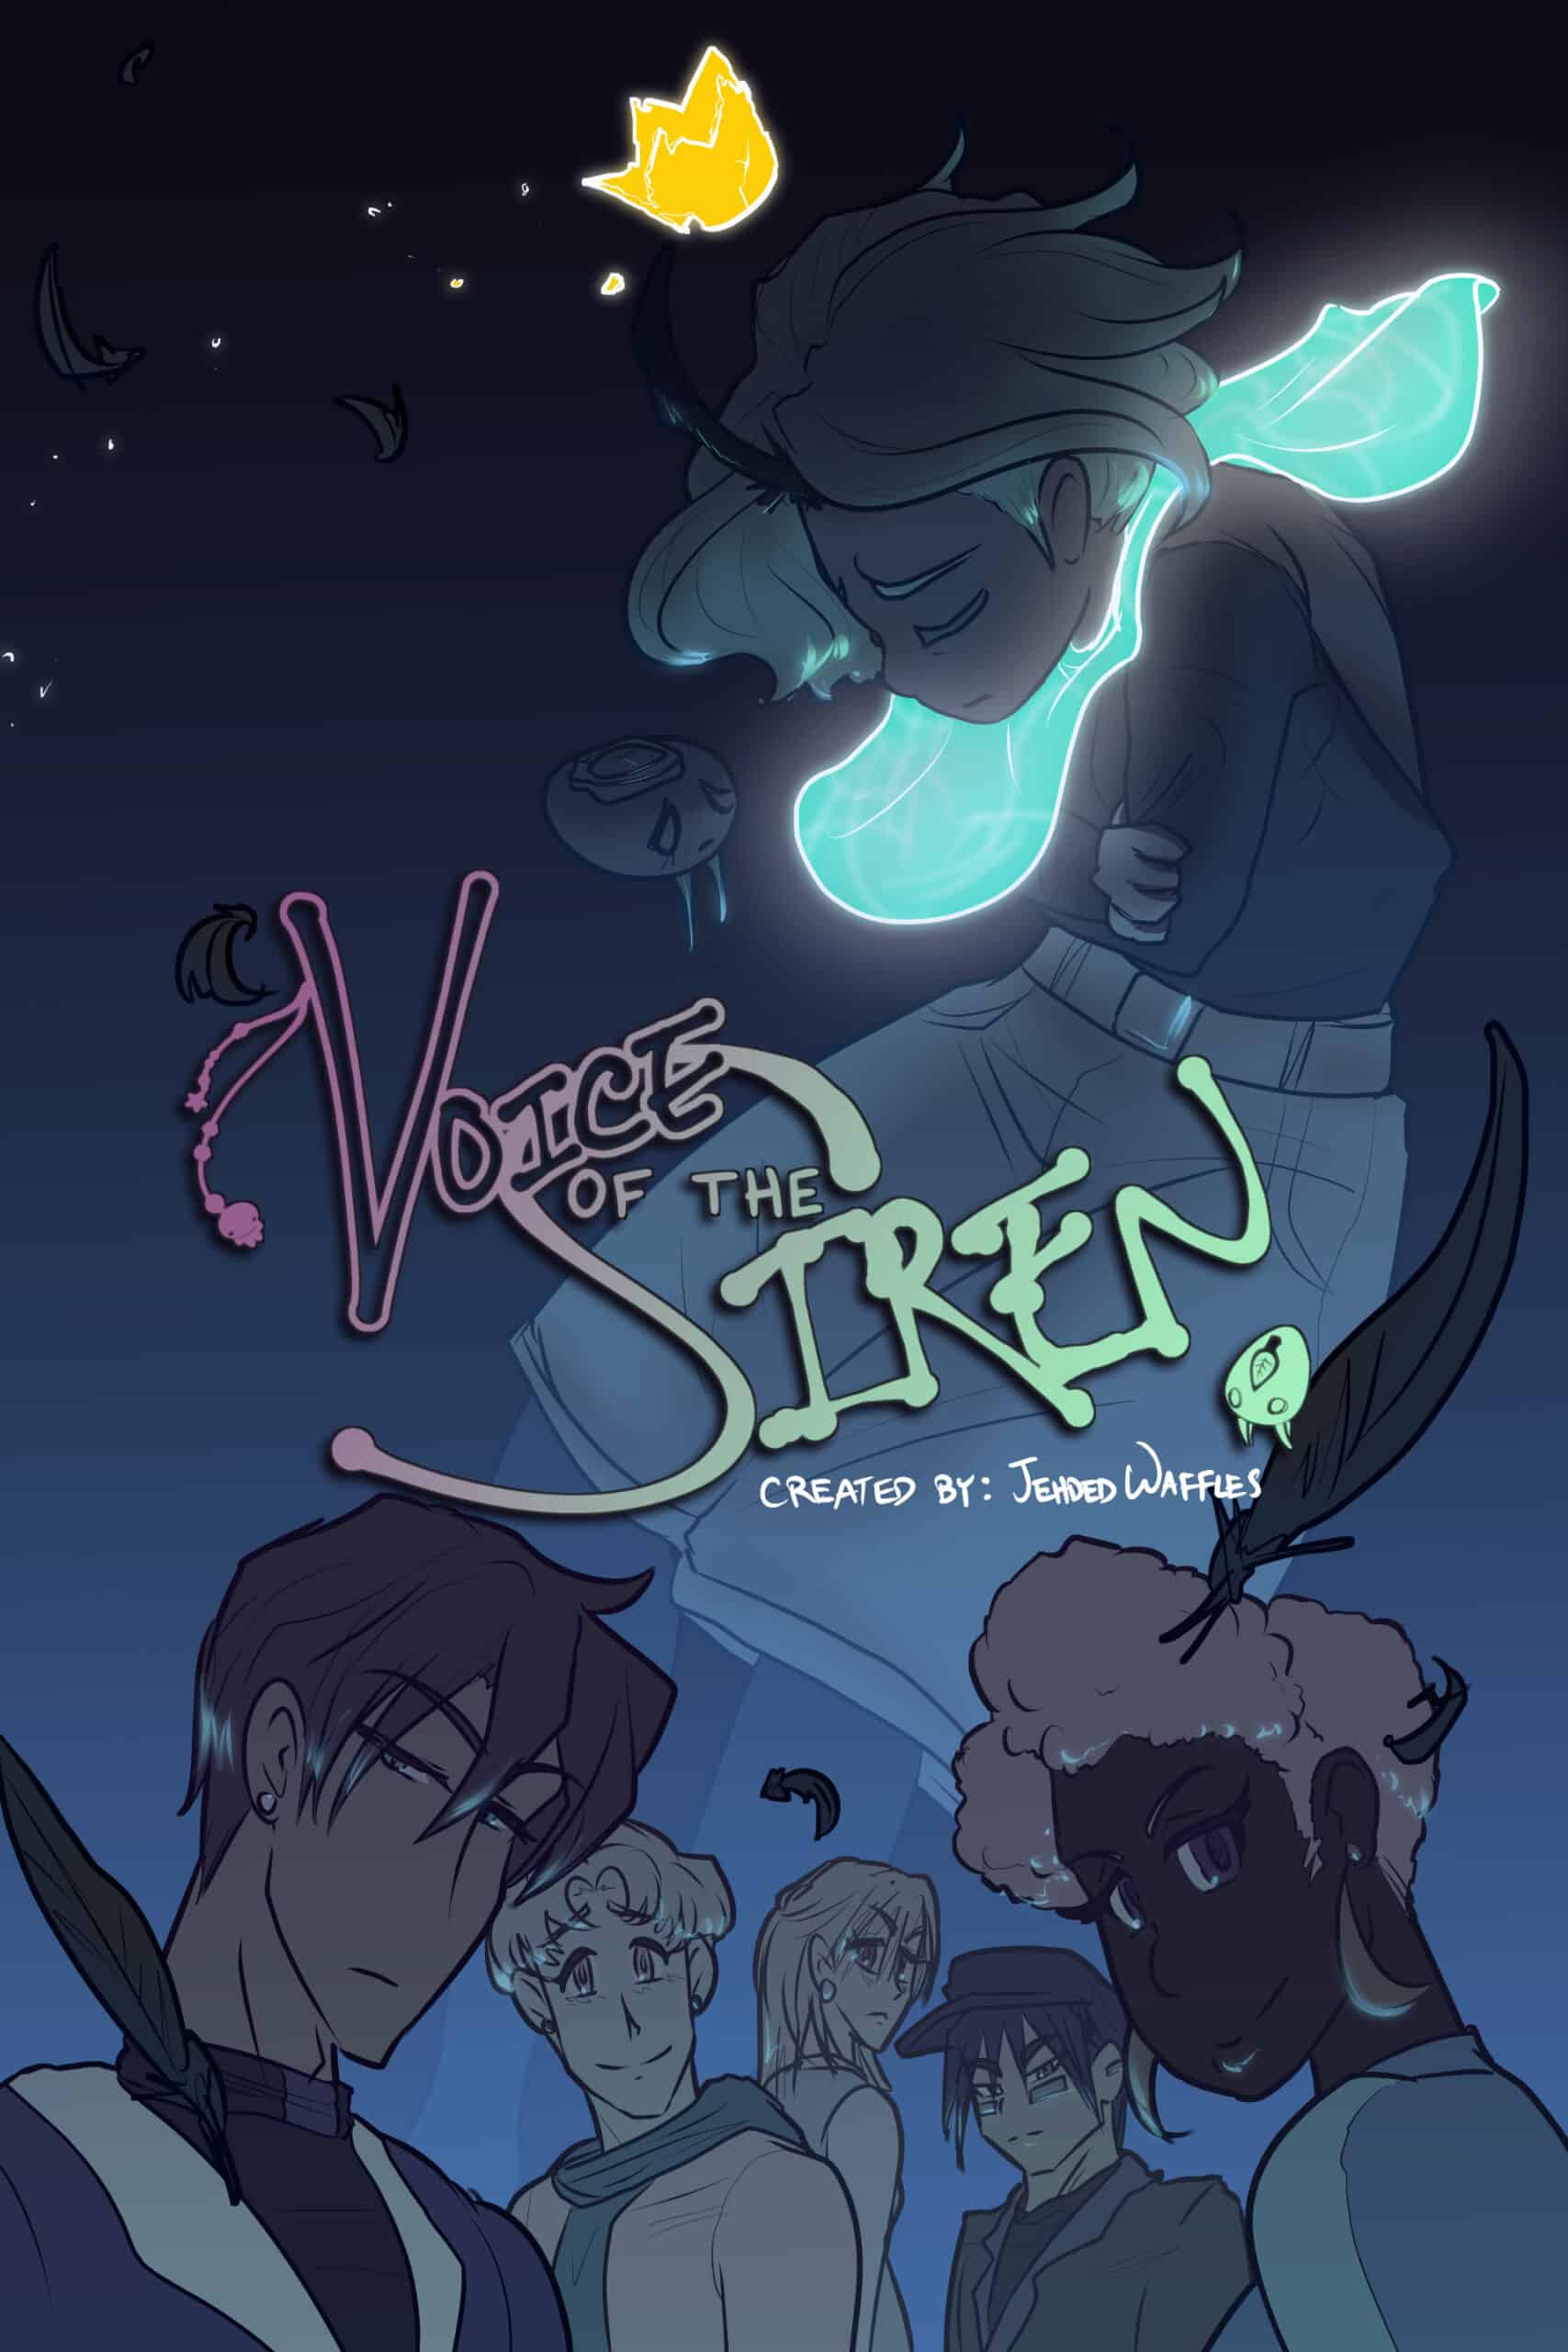 Voice of the Siren #0-1: The Dilemmas of The Prince of Kannu - Comic Watch